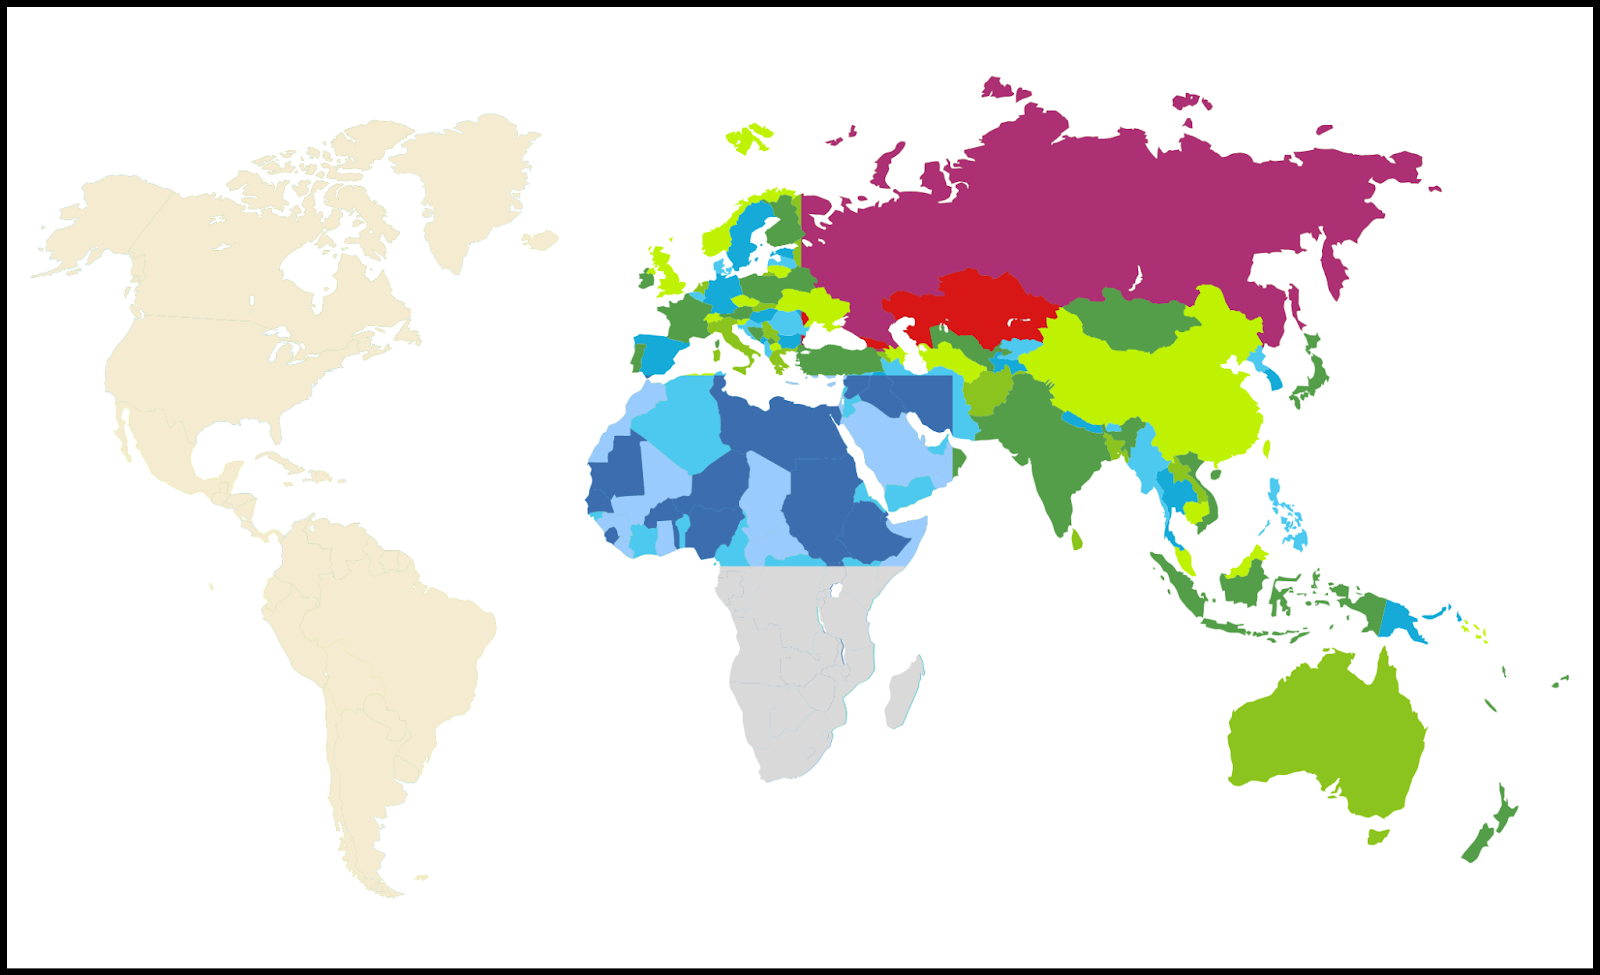 This image is that of a world map with different regions highlighted n different colors based on a person's ancestry test results.